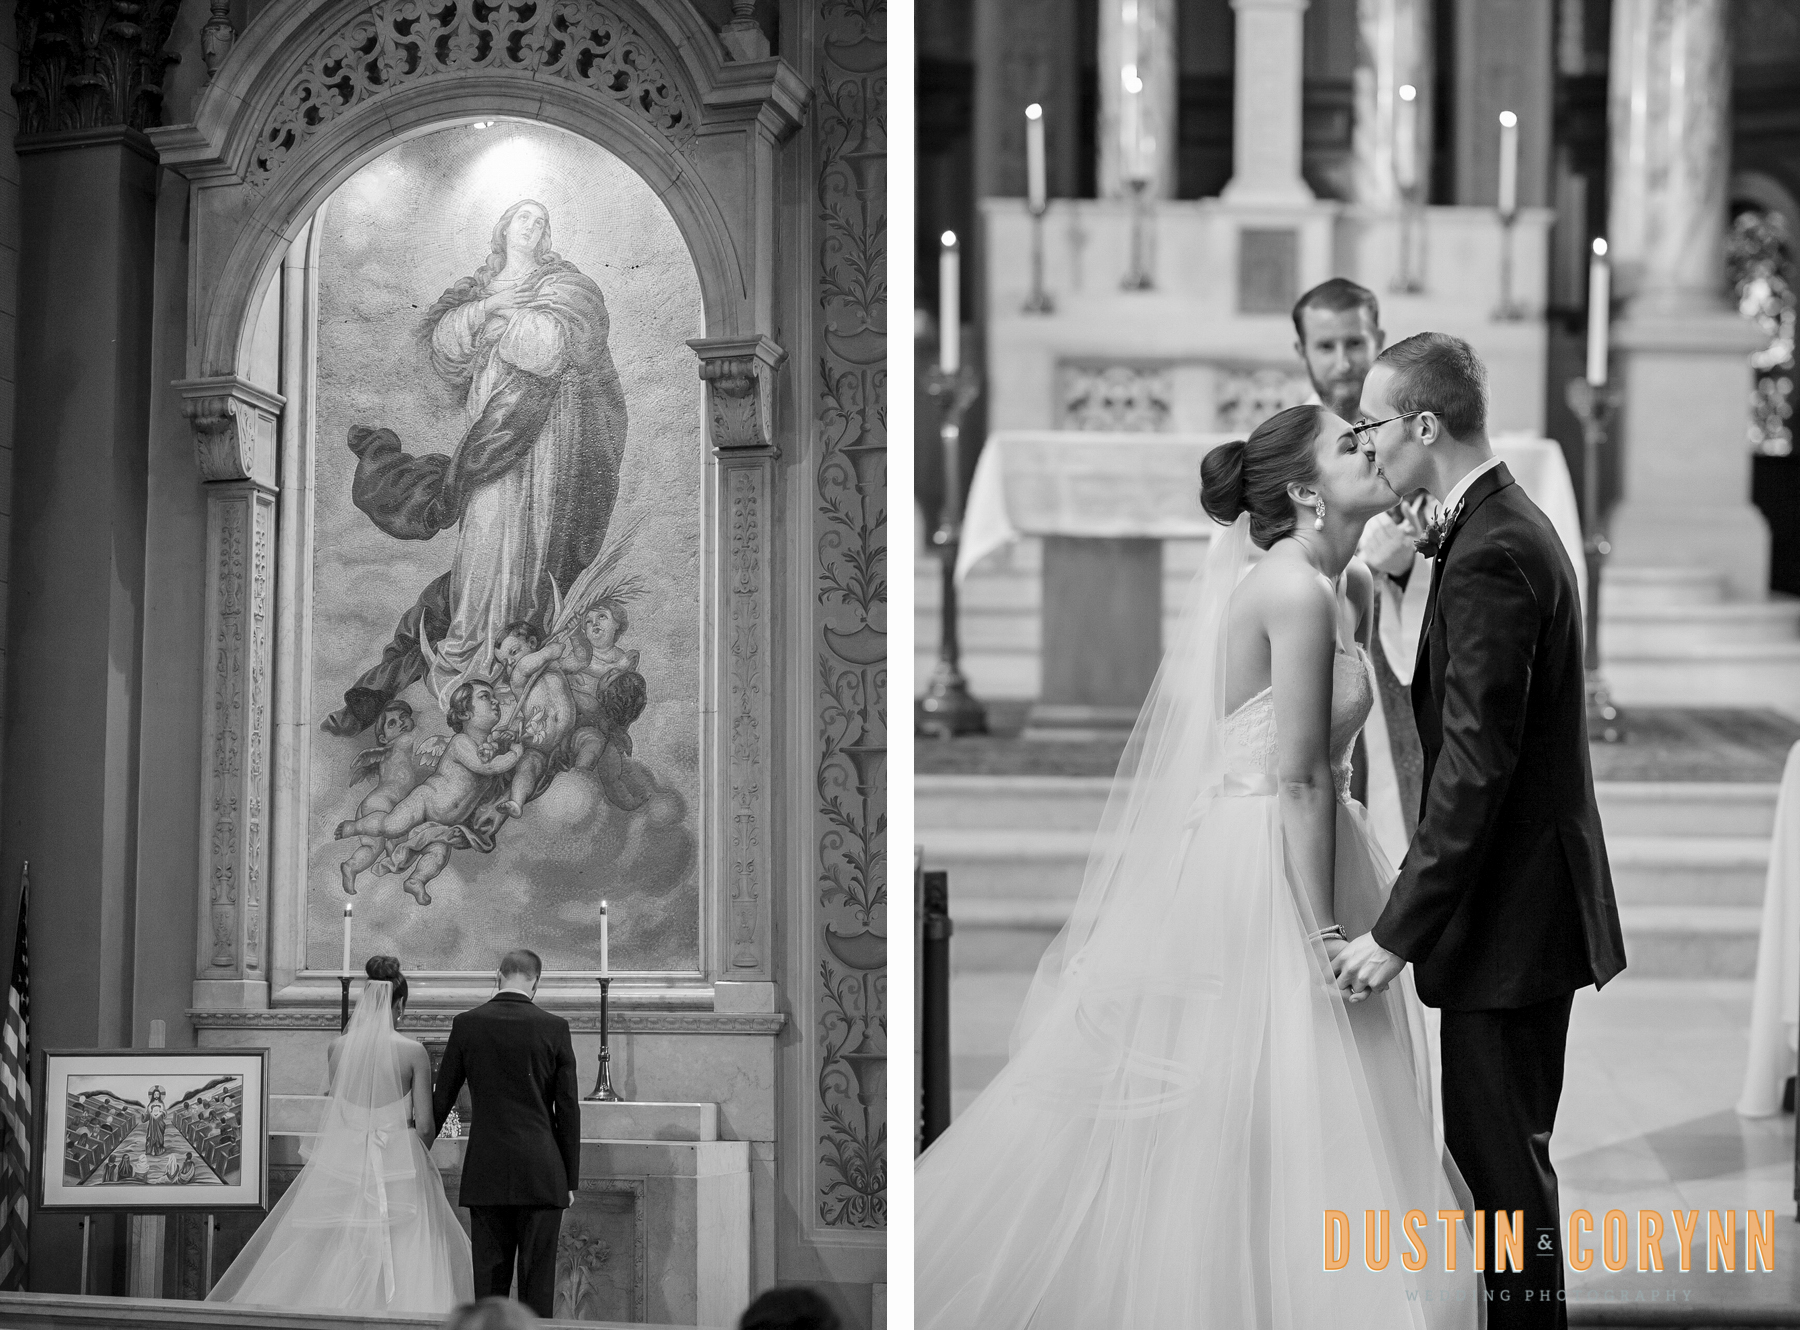 Indianapolis Photography - Dustin & Corynn Photography